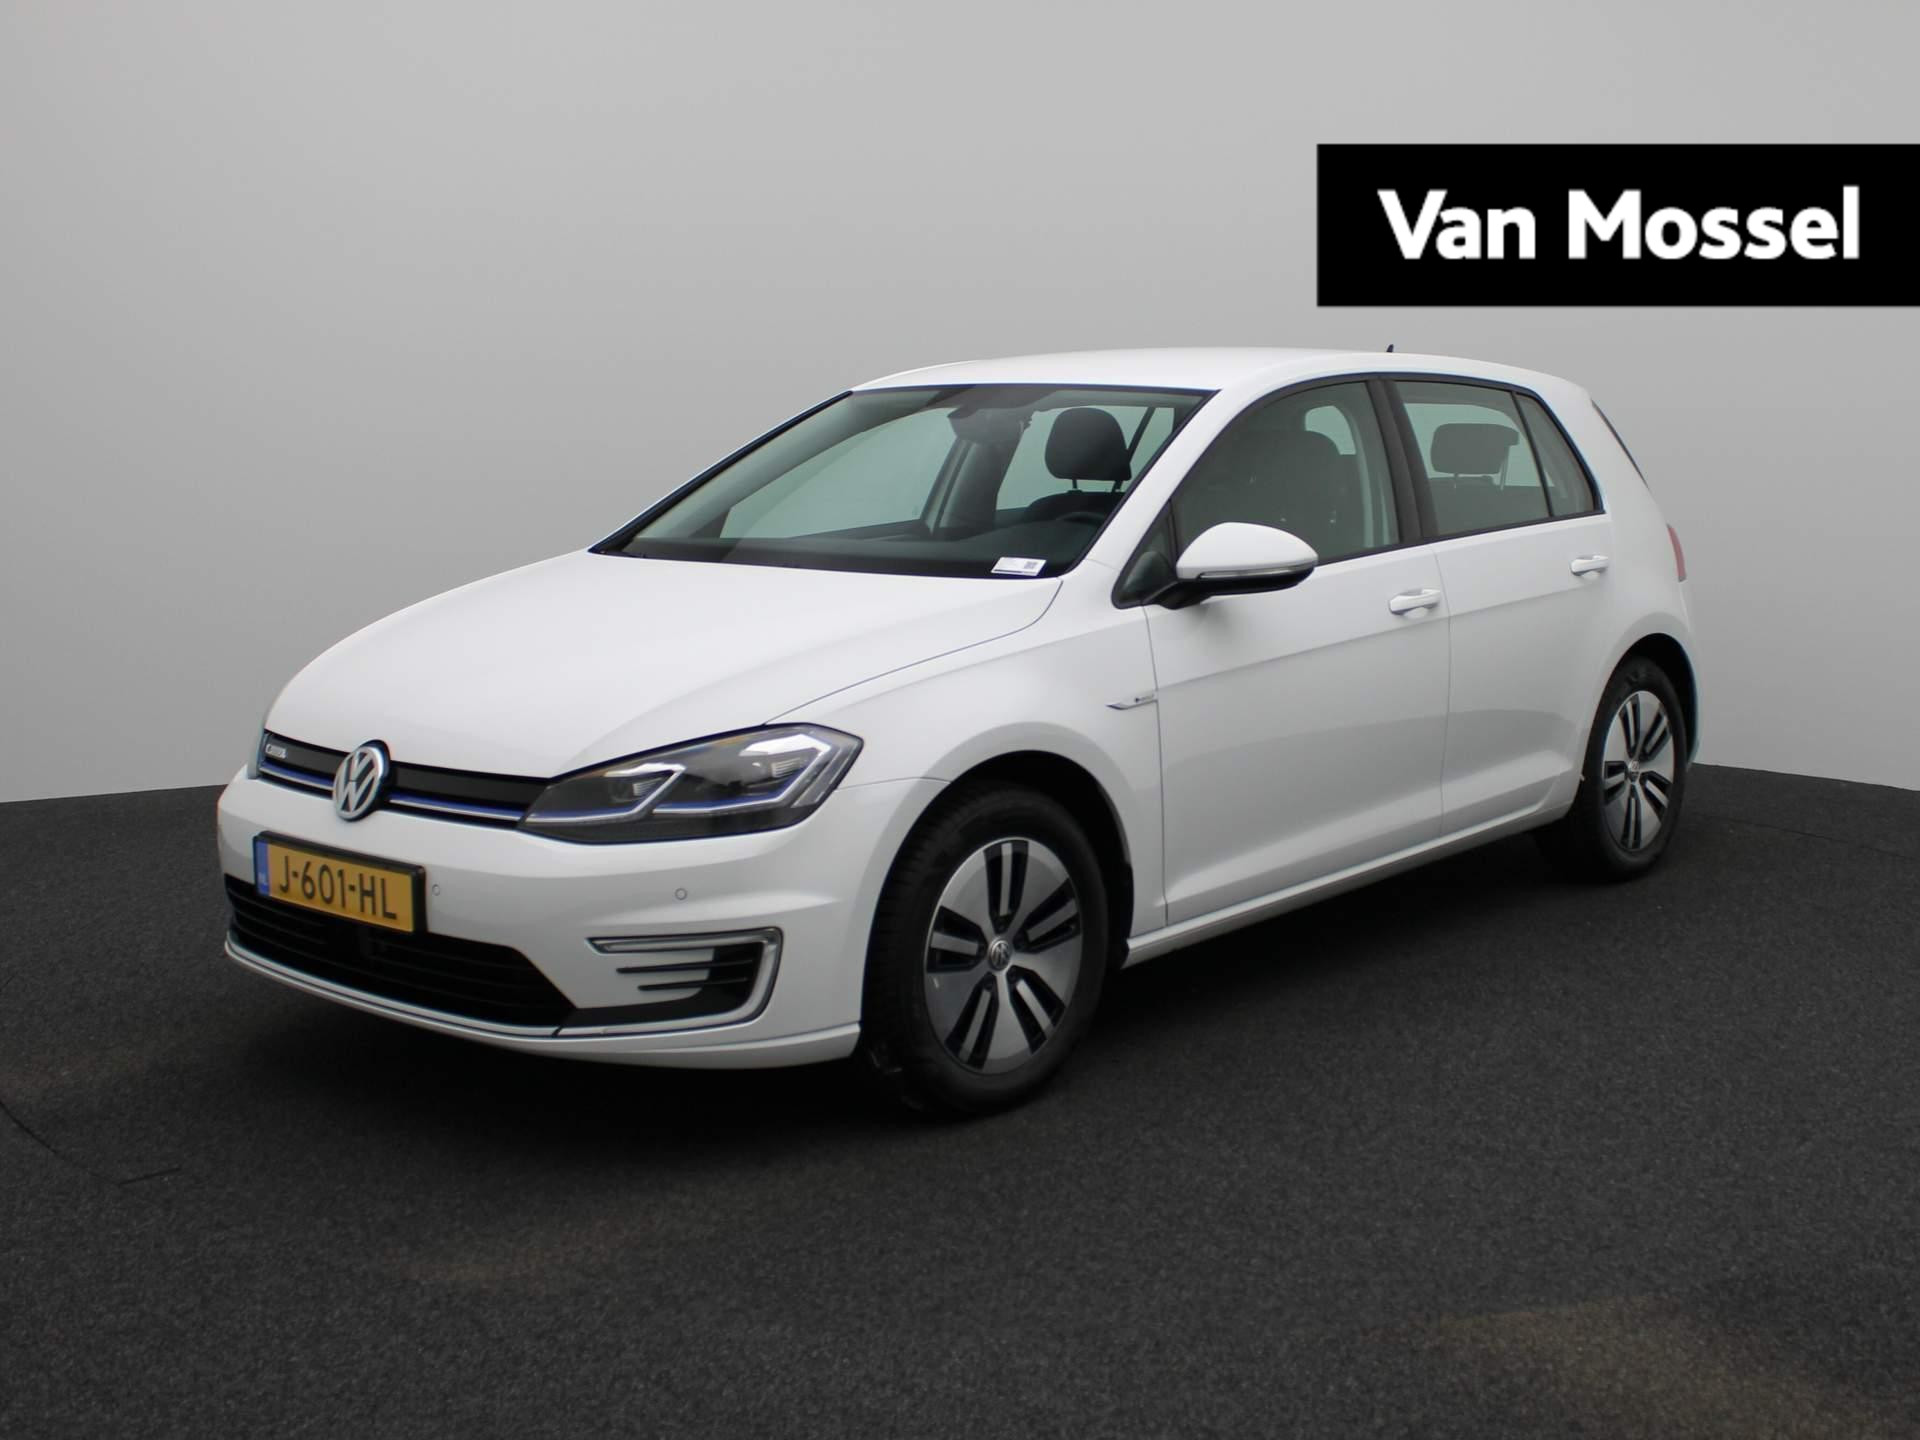 Volkswagen e-Golf E-DITION | APPLE CARPLAY - ANDROID AUTO | LED VERLICHTING | CLIMATE CONTROL | PARKEERSENSOREN VOOR + ACHTER |